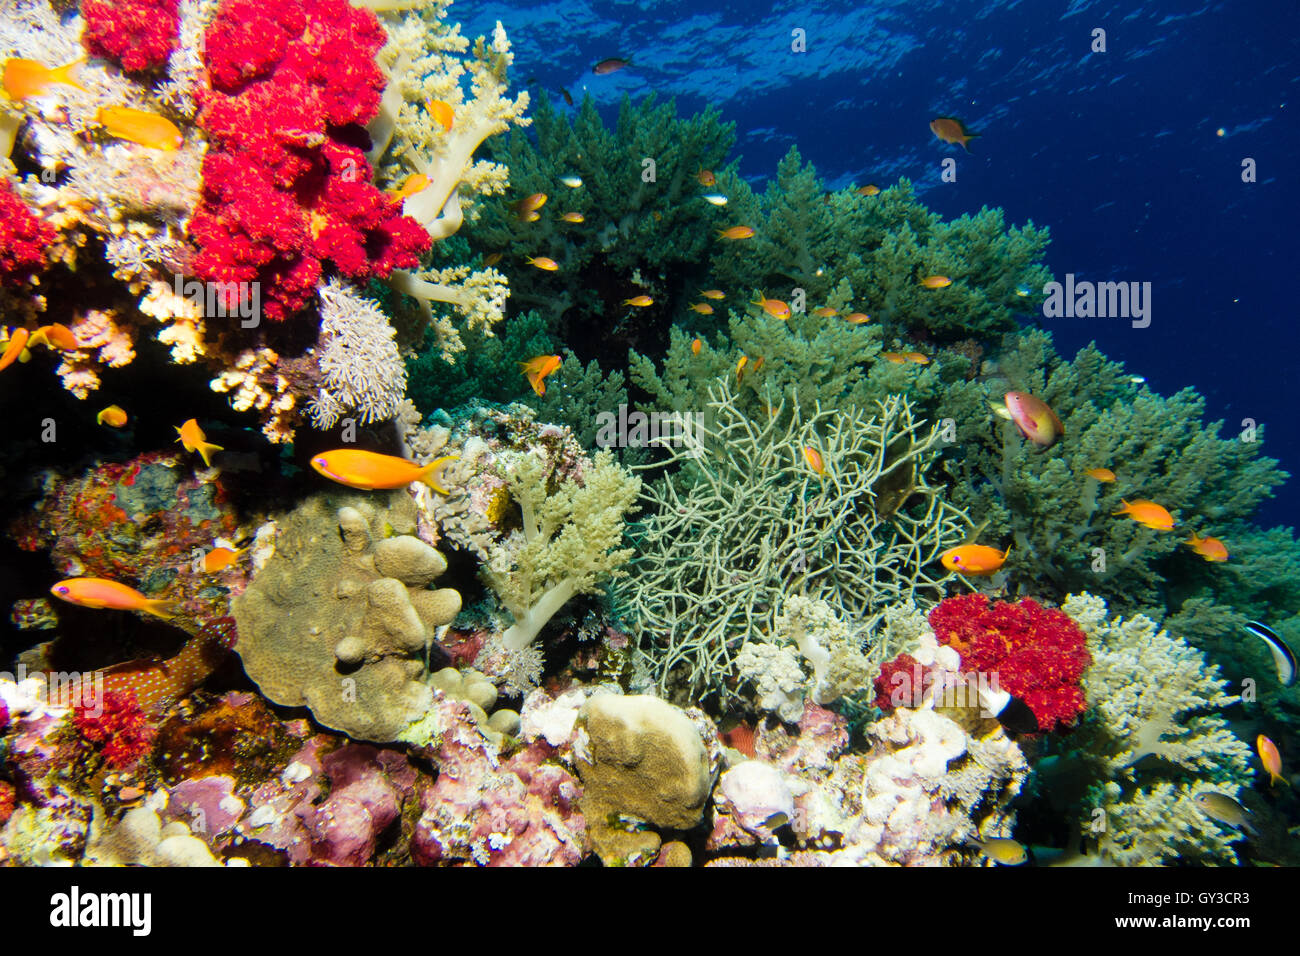 Coral garden in the red sea Stock Photo